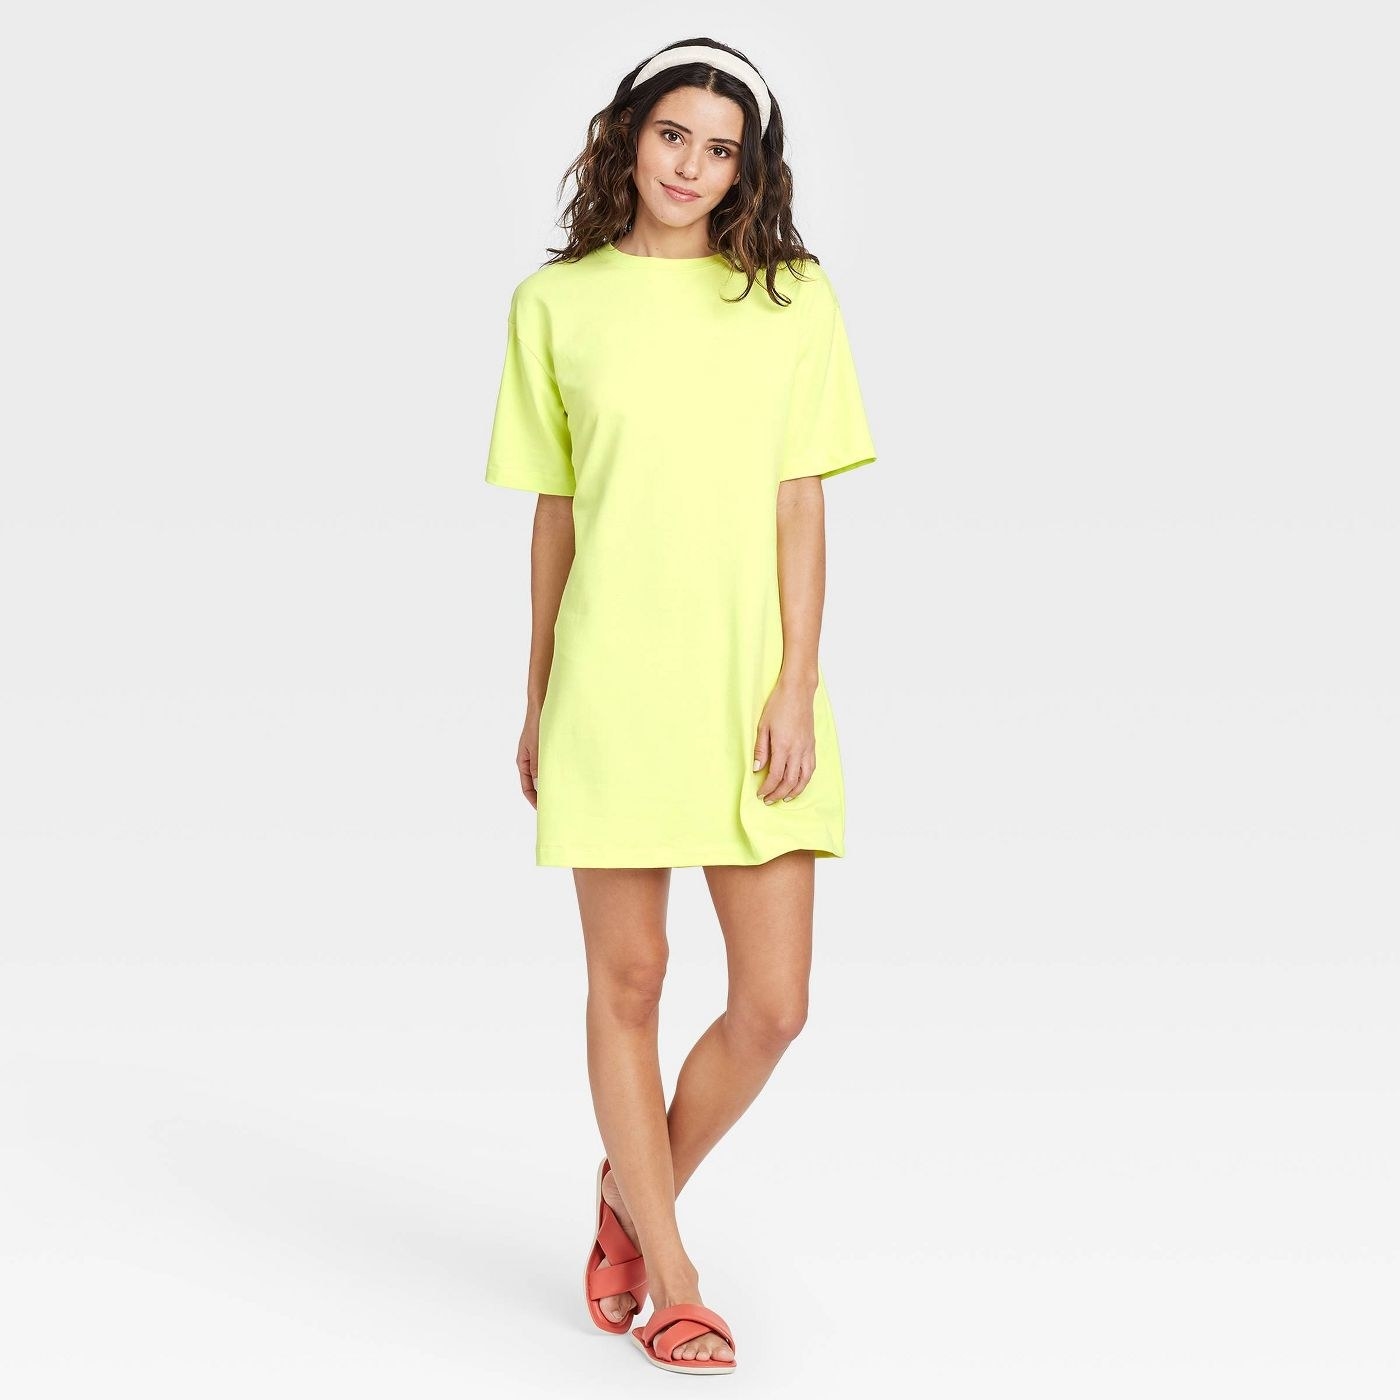 Model wearing neon yellow dress, goes past the thigh